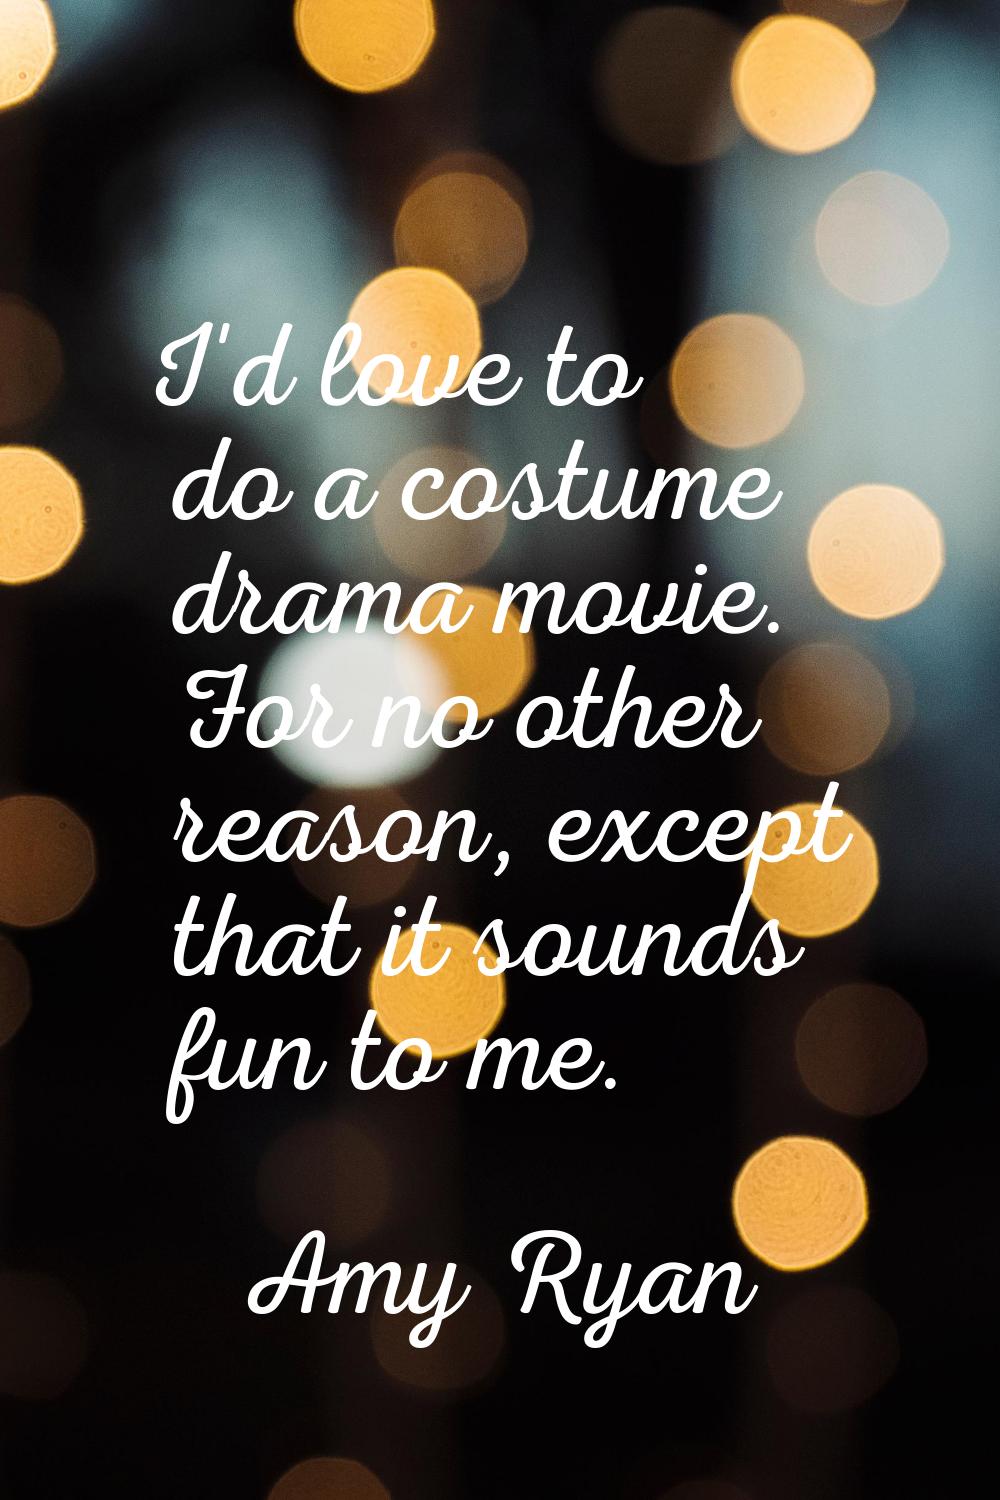 I'd love to do a costume drama movie. For no other reason, except that it sounds fun to me.